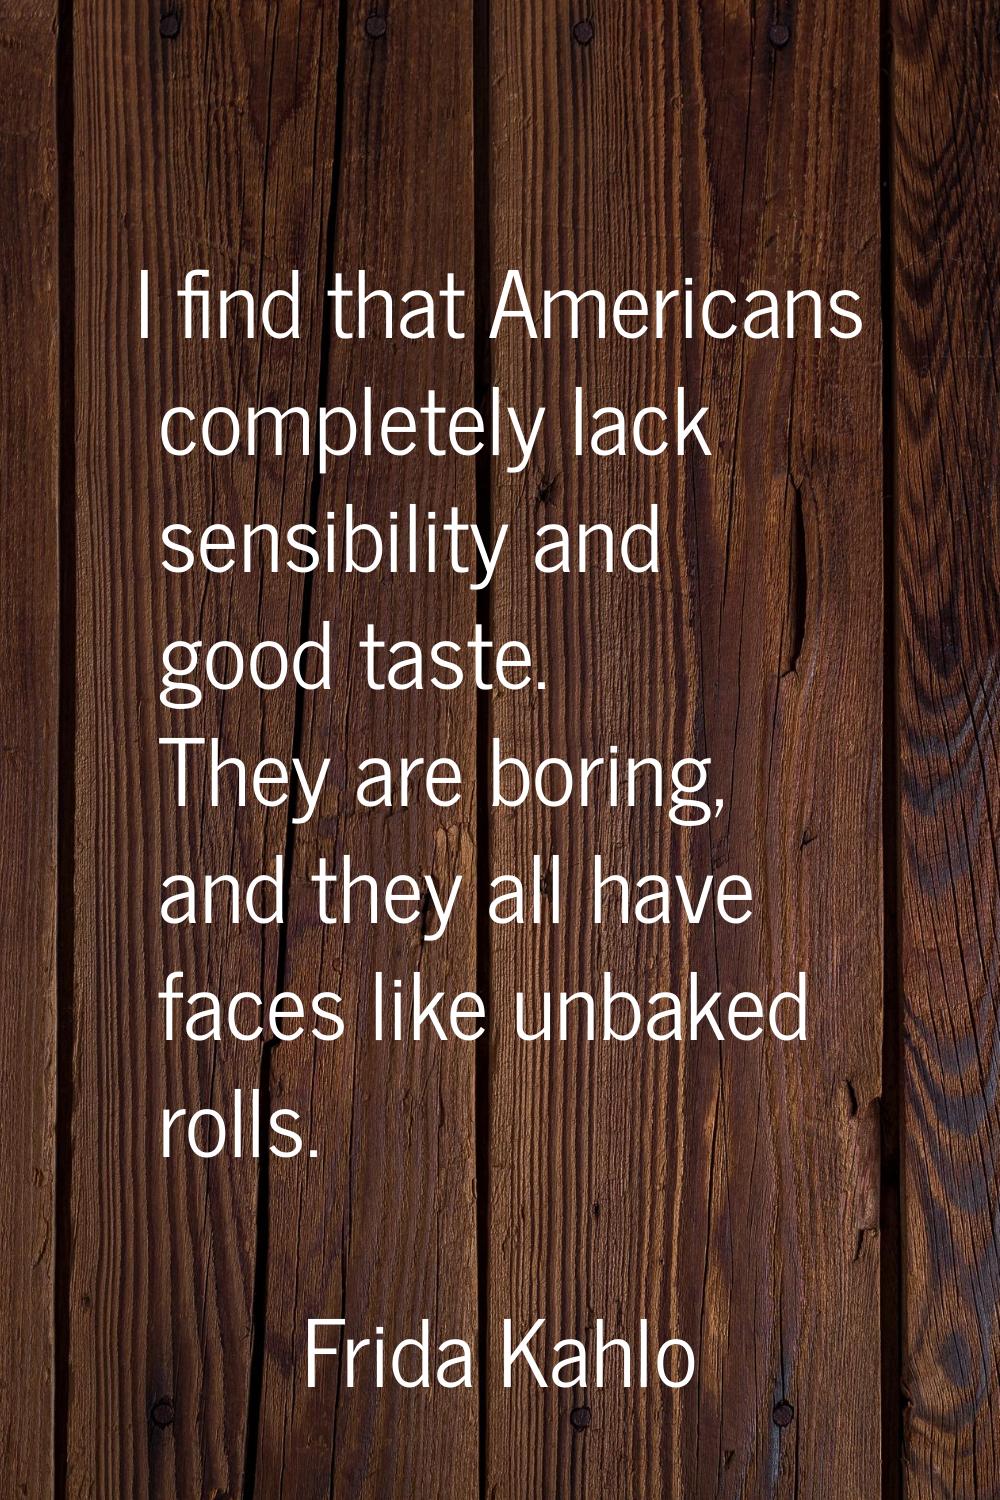 I find that Americans completely lack sensibility and good taste. They are boring, and they all hav